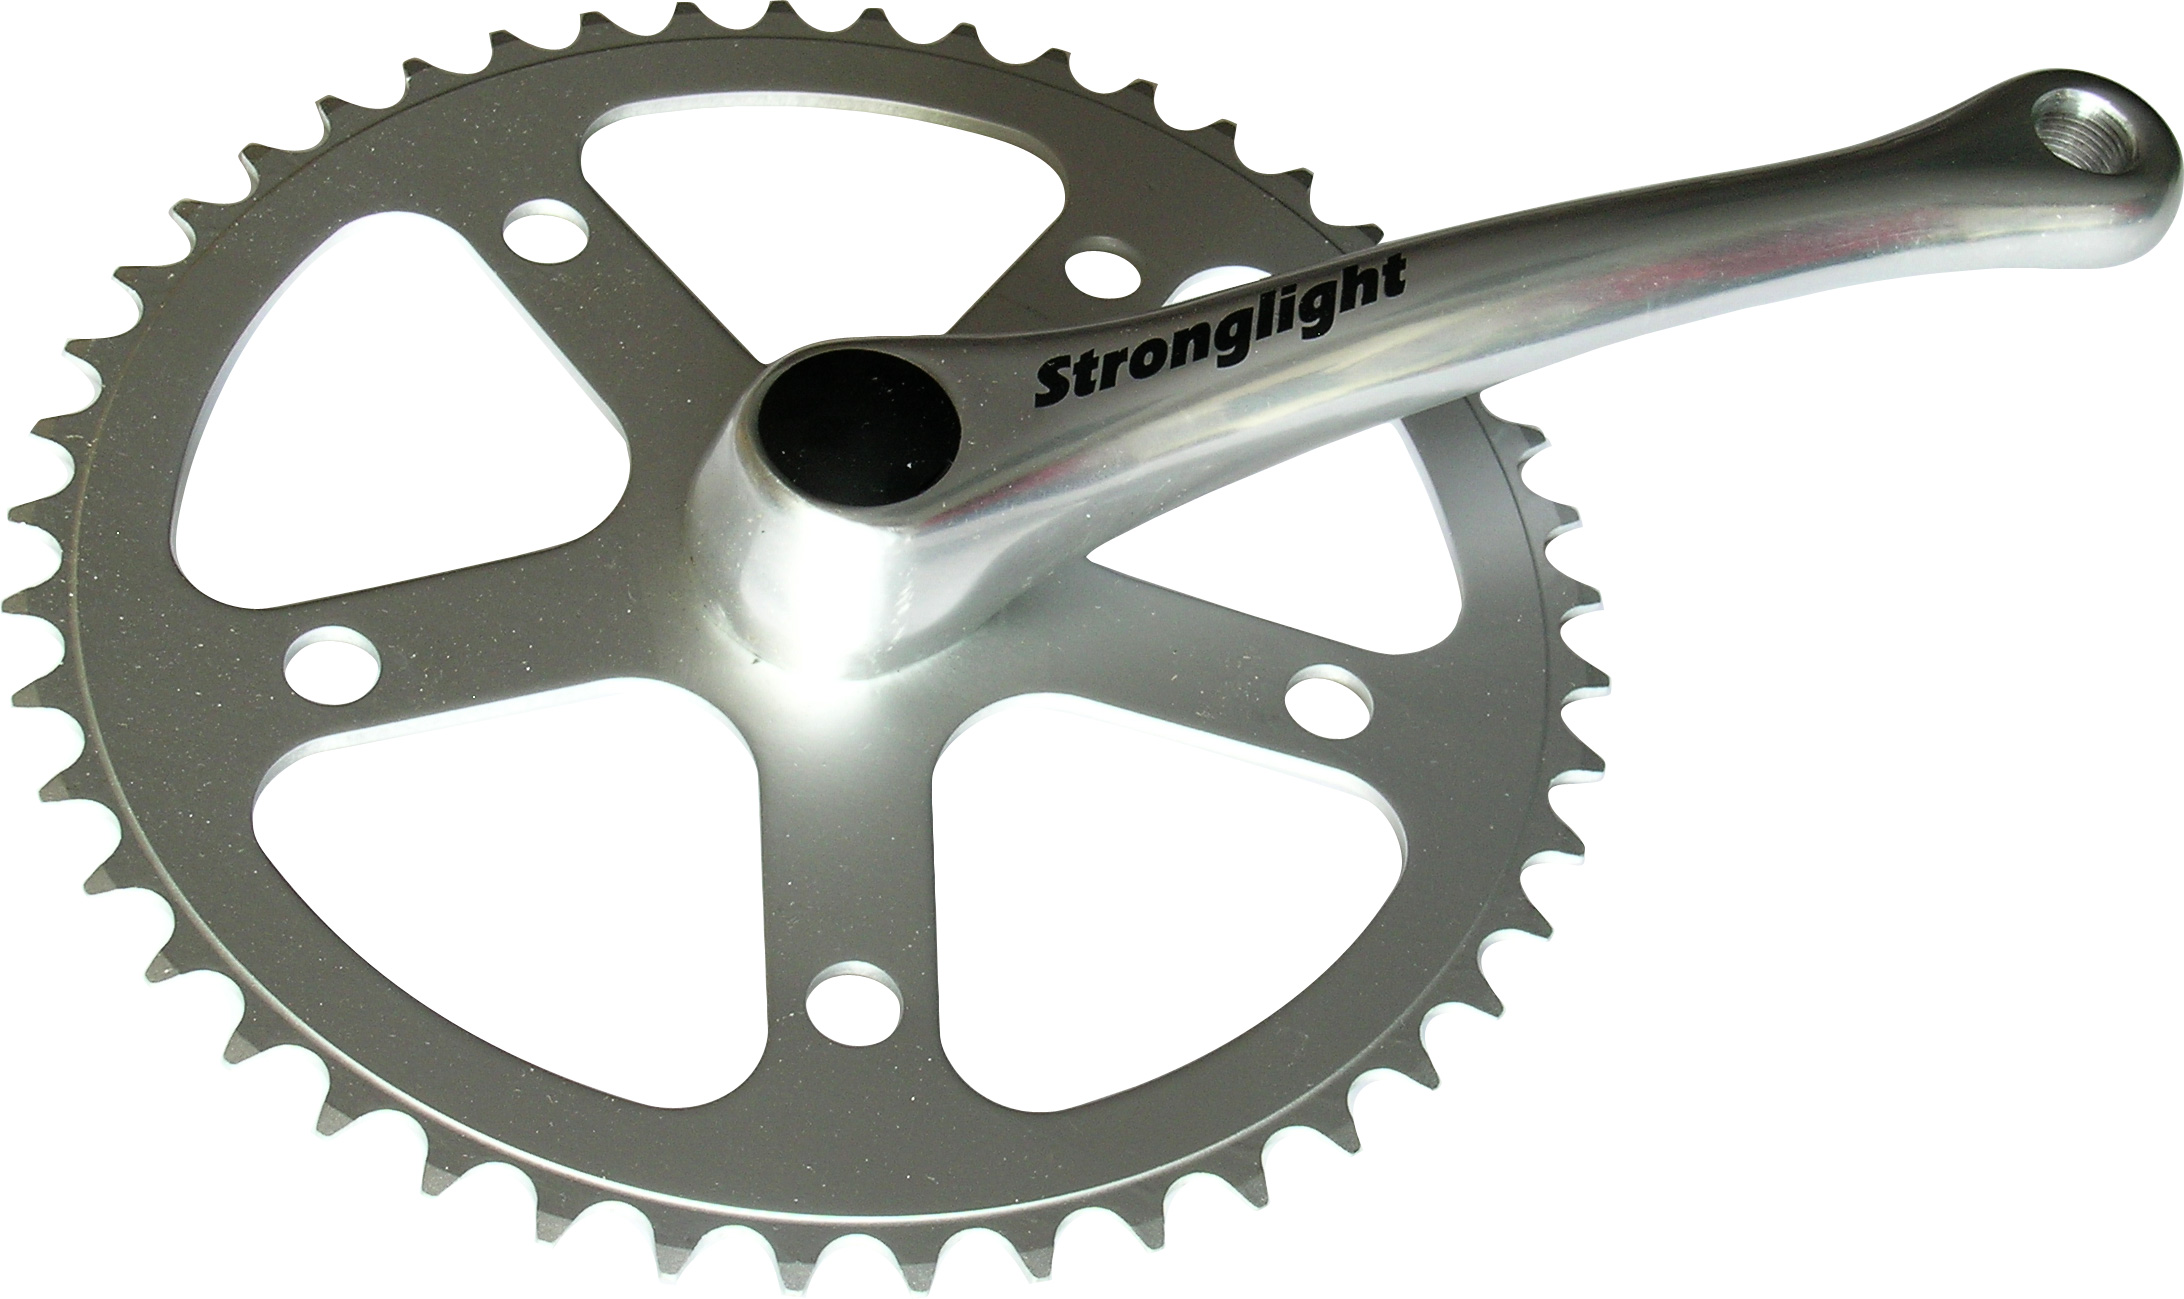 55S244 Stronglight 44T X 3/32" 55 Series Single Chainset